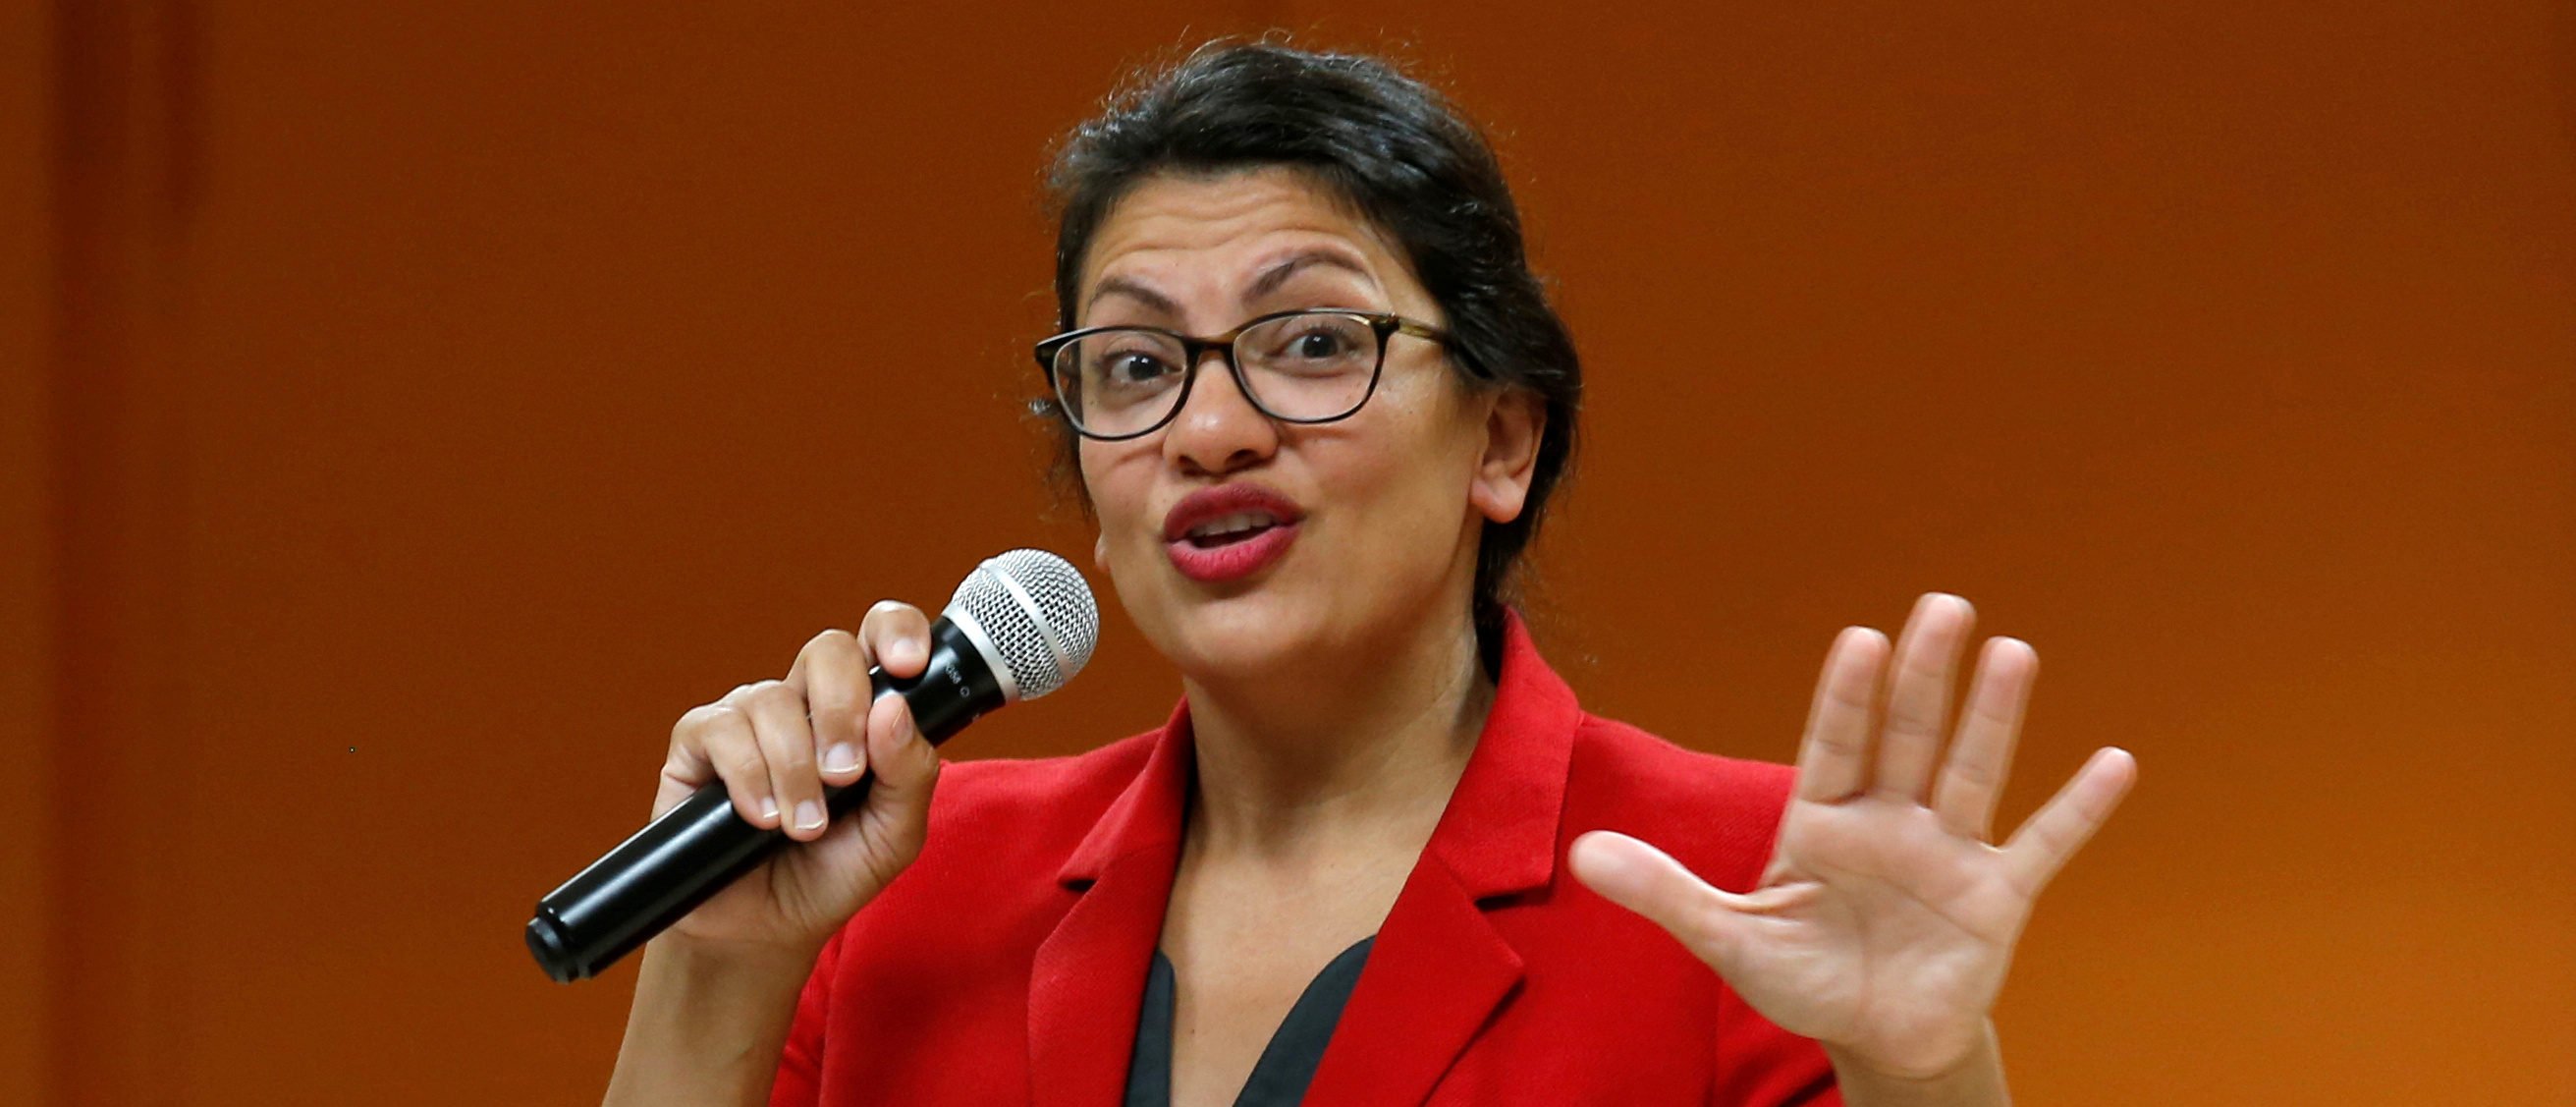 U.S. Congresswoman Tlaib addresses her constituents during a Town Hall style meeting in Inkster